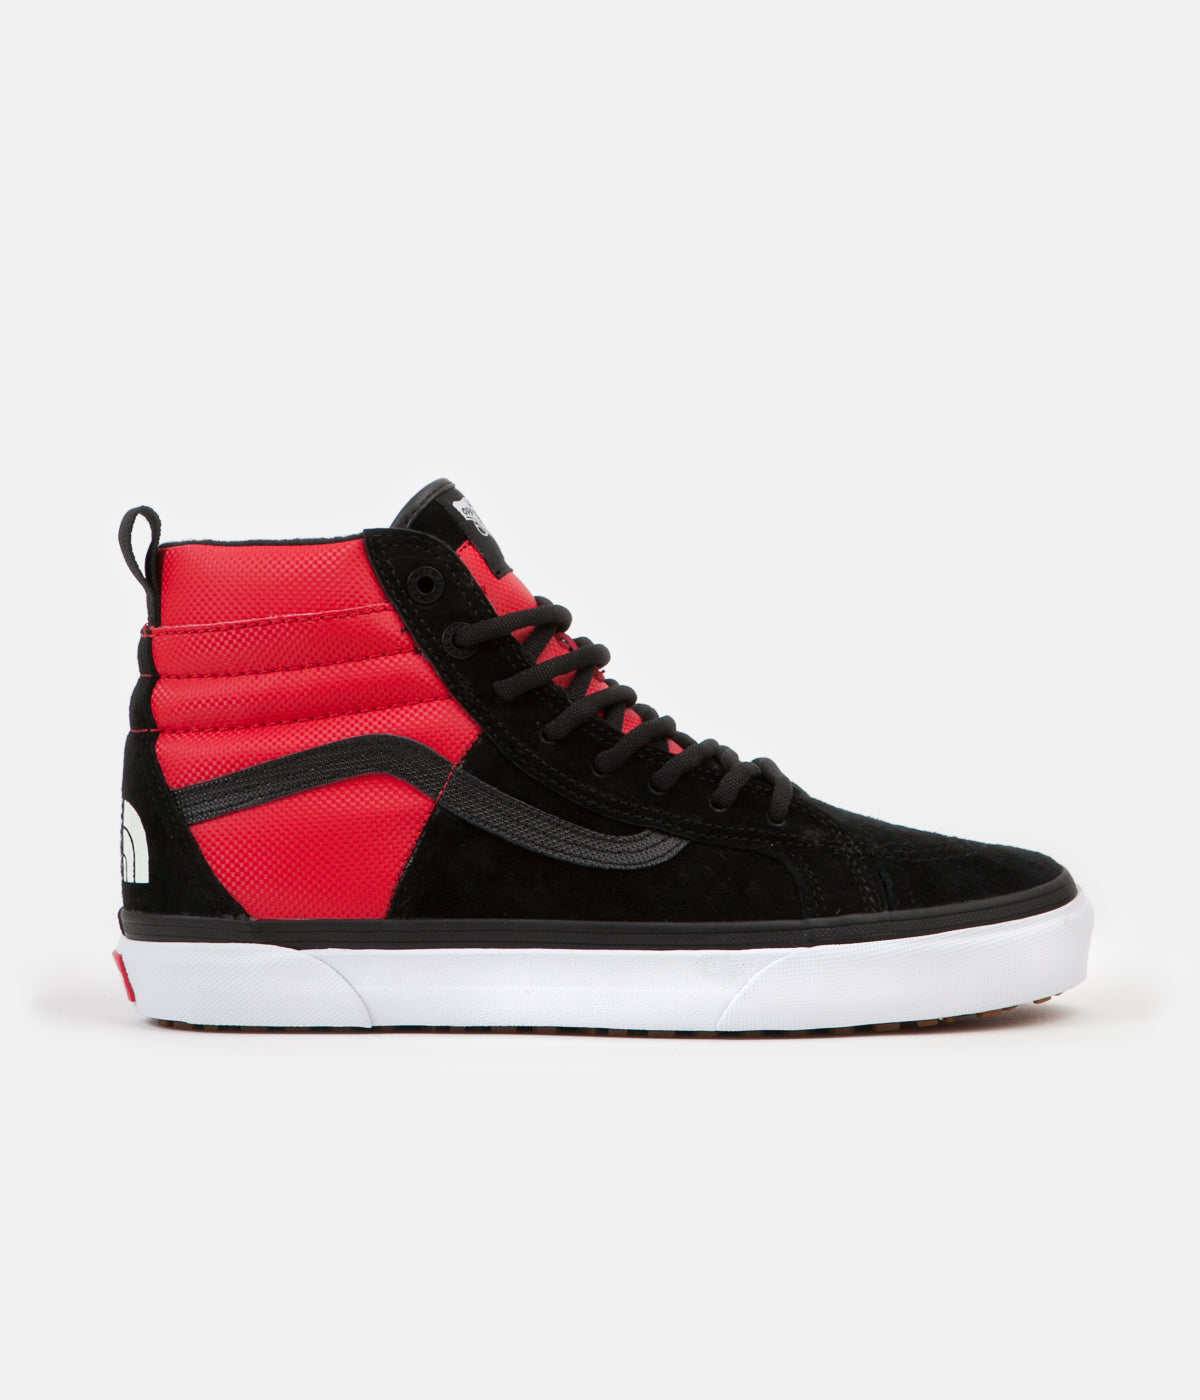 Vans X The North Face 46 MTE DX Shoes - Black / Red | Always in